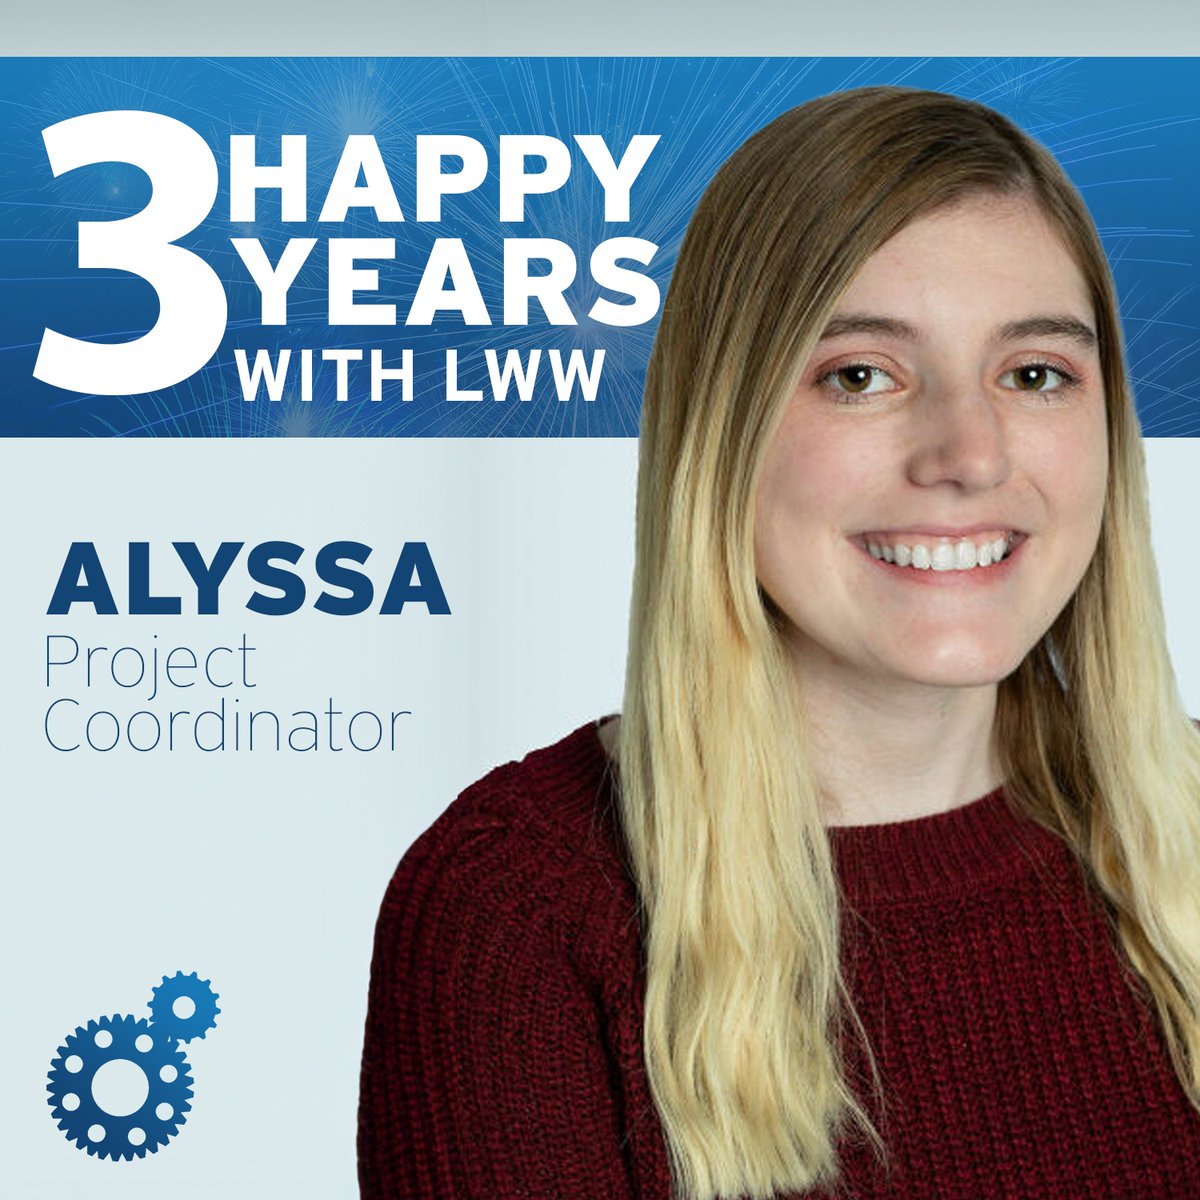 Alyssa, we are so happy to celebrate your three-year anniversary with Legend Web Works!

Happy Legend-A-Versary, Alyssa! 🎂

#LegendWebWorks #HappyWorkAnniversary #LWWAnniversary #WorkAnniversary #LegendAVersary